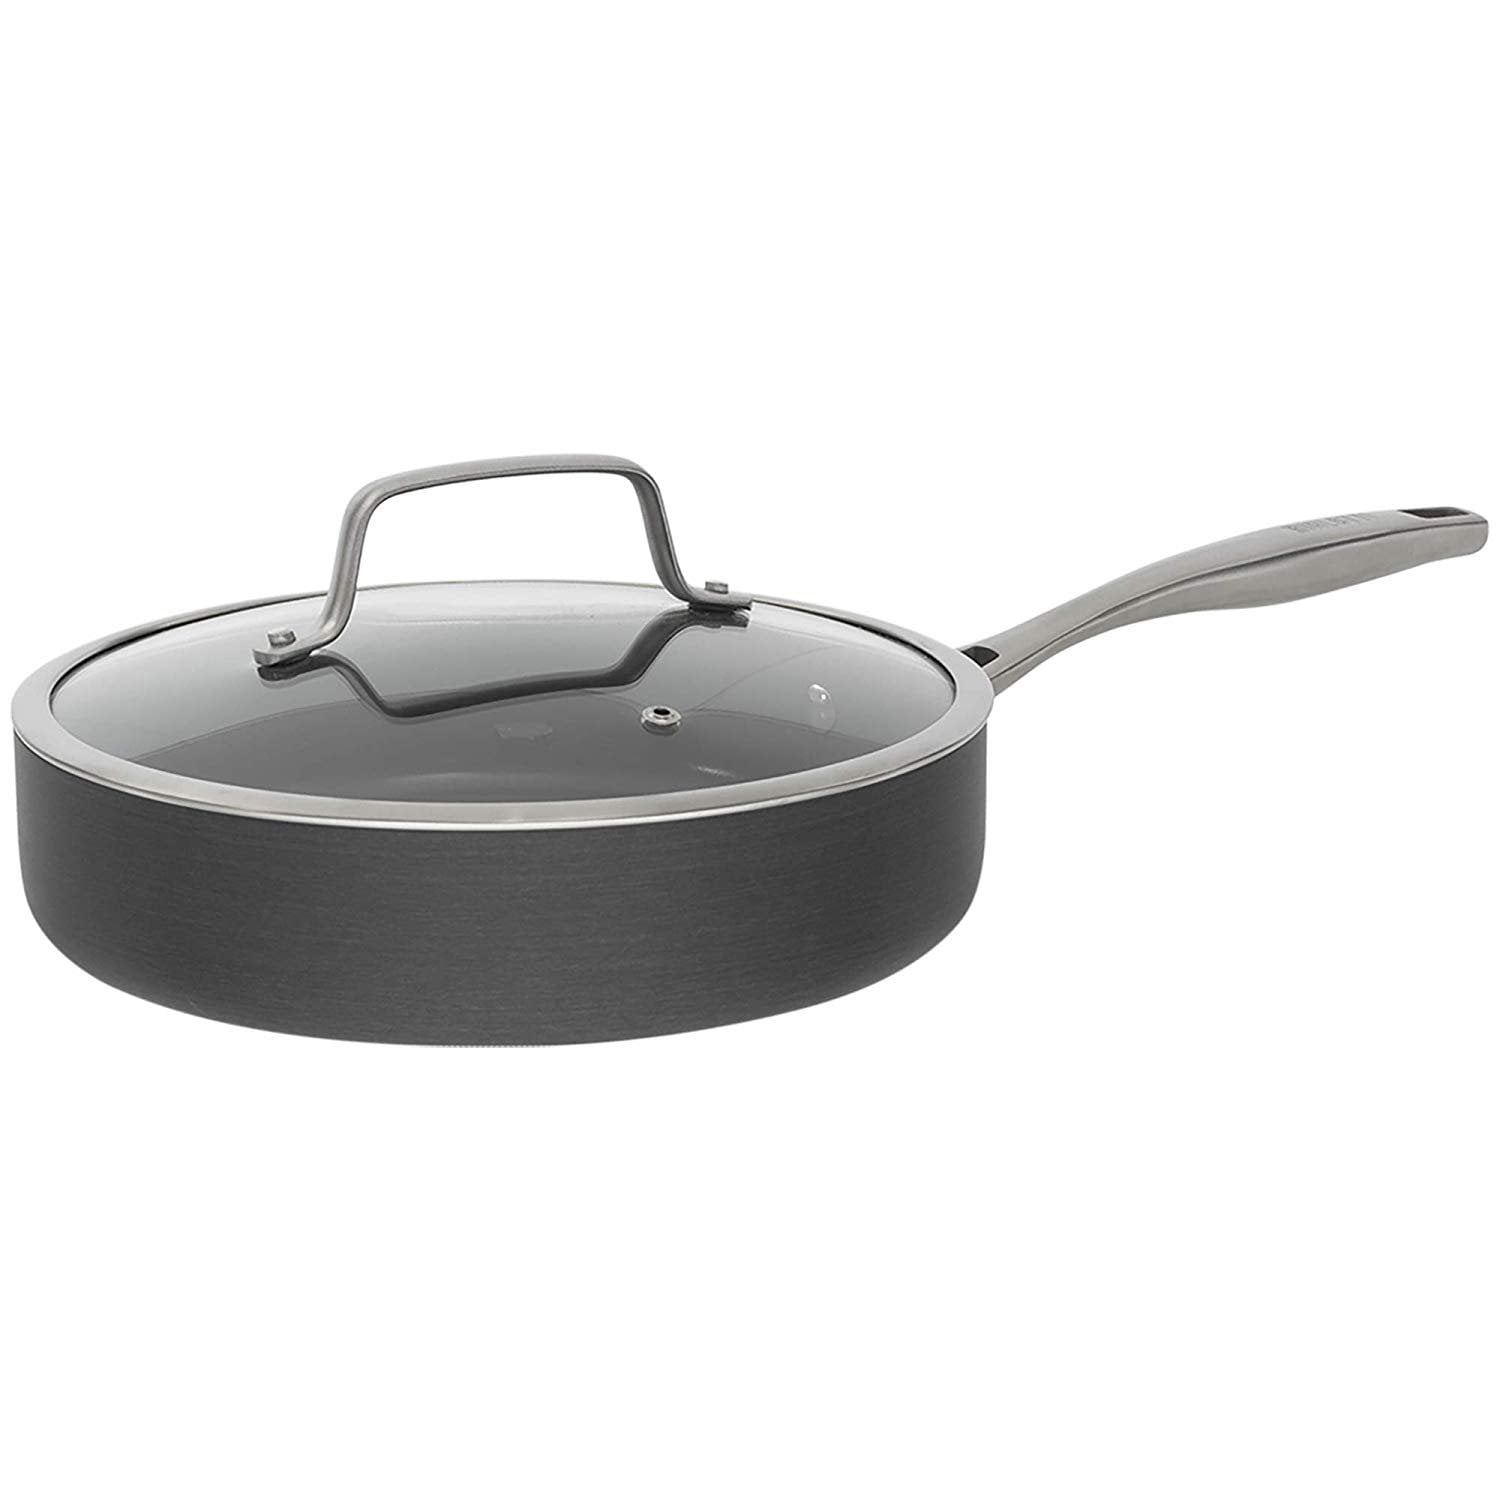 Bialetti 07263 Aeternum Easy Saute Pan 10in Silver Pans for sale online